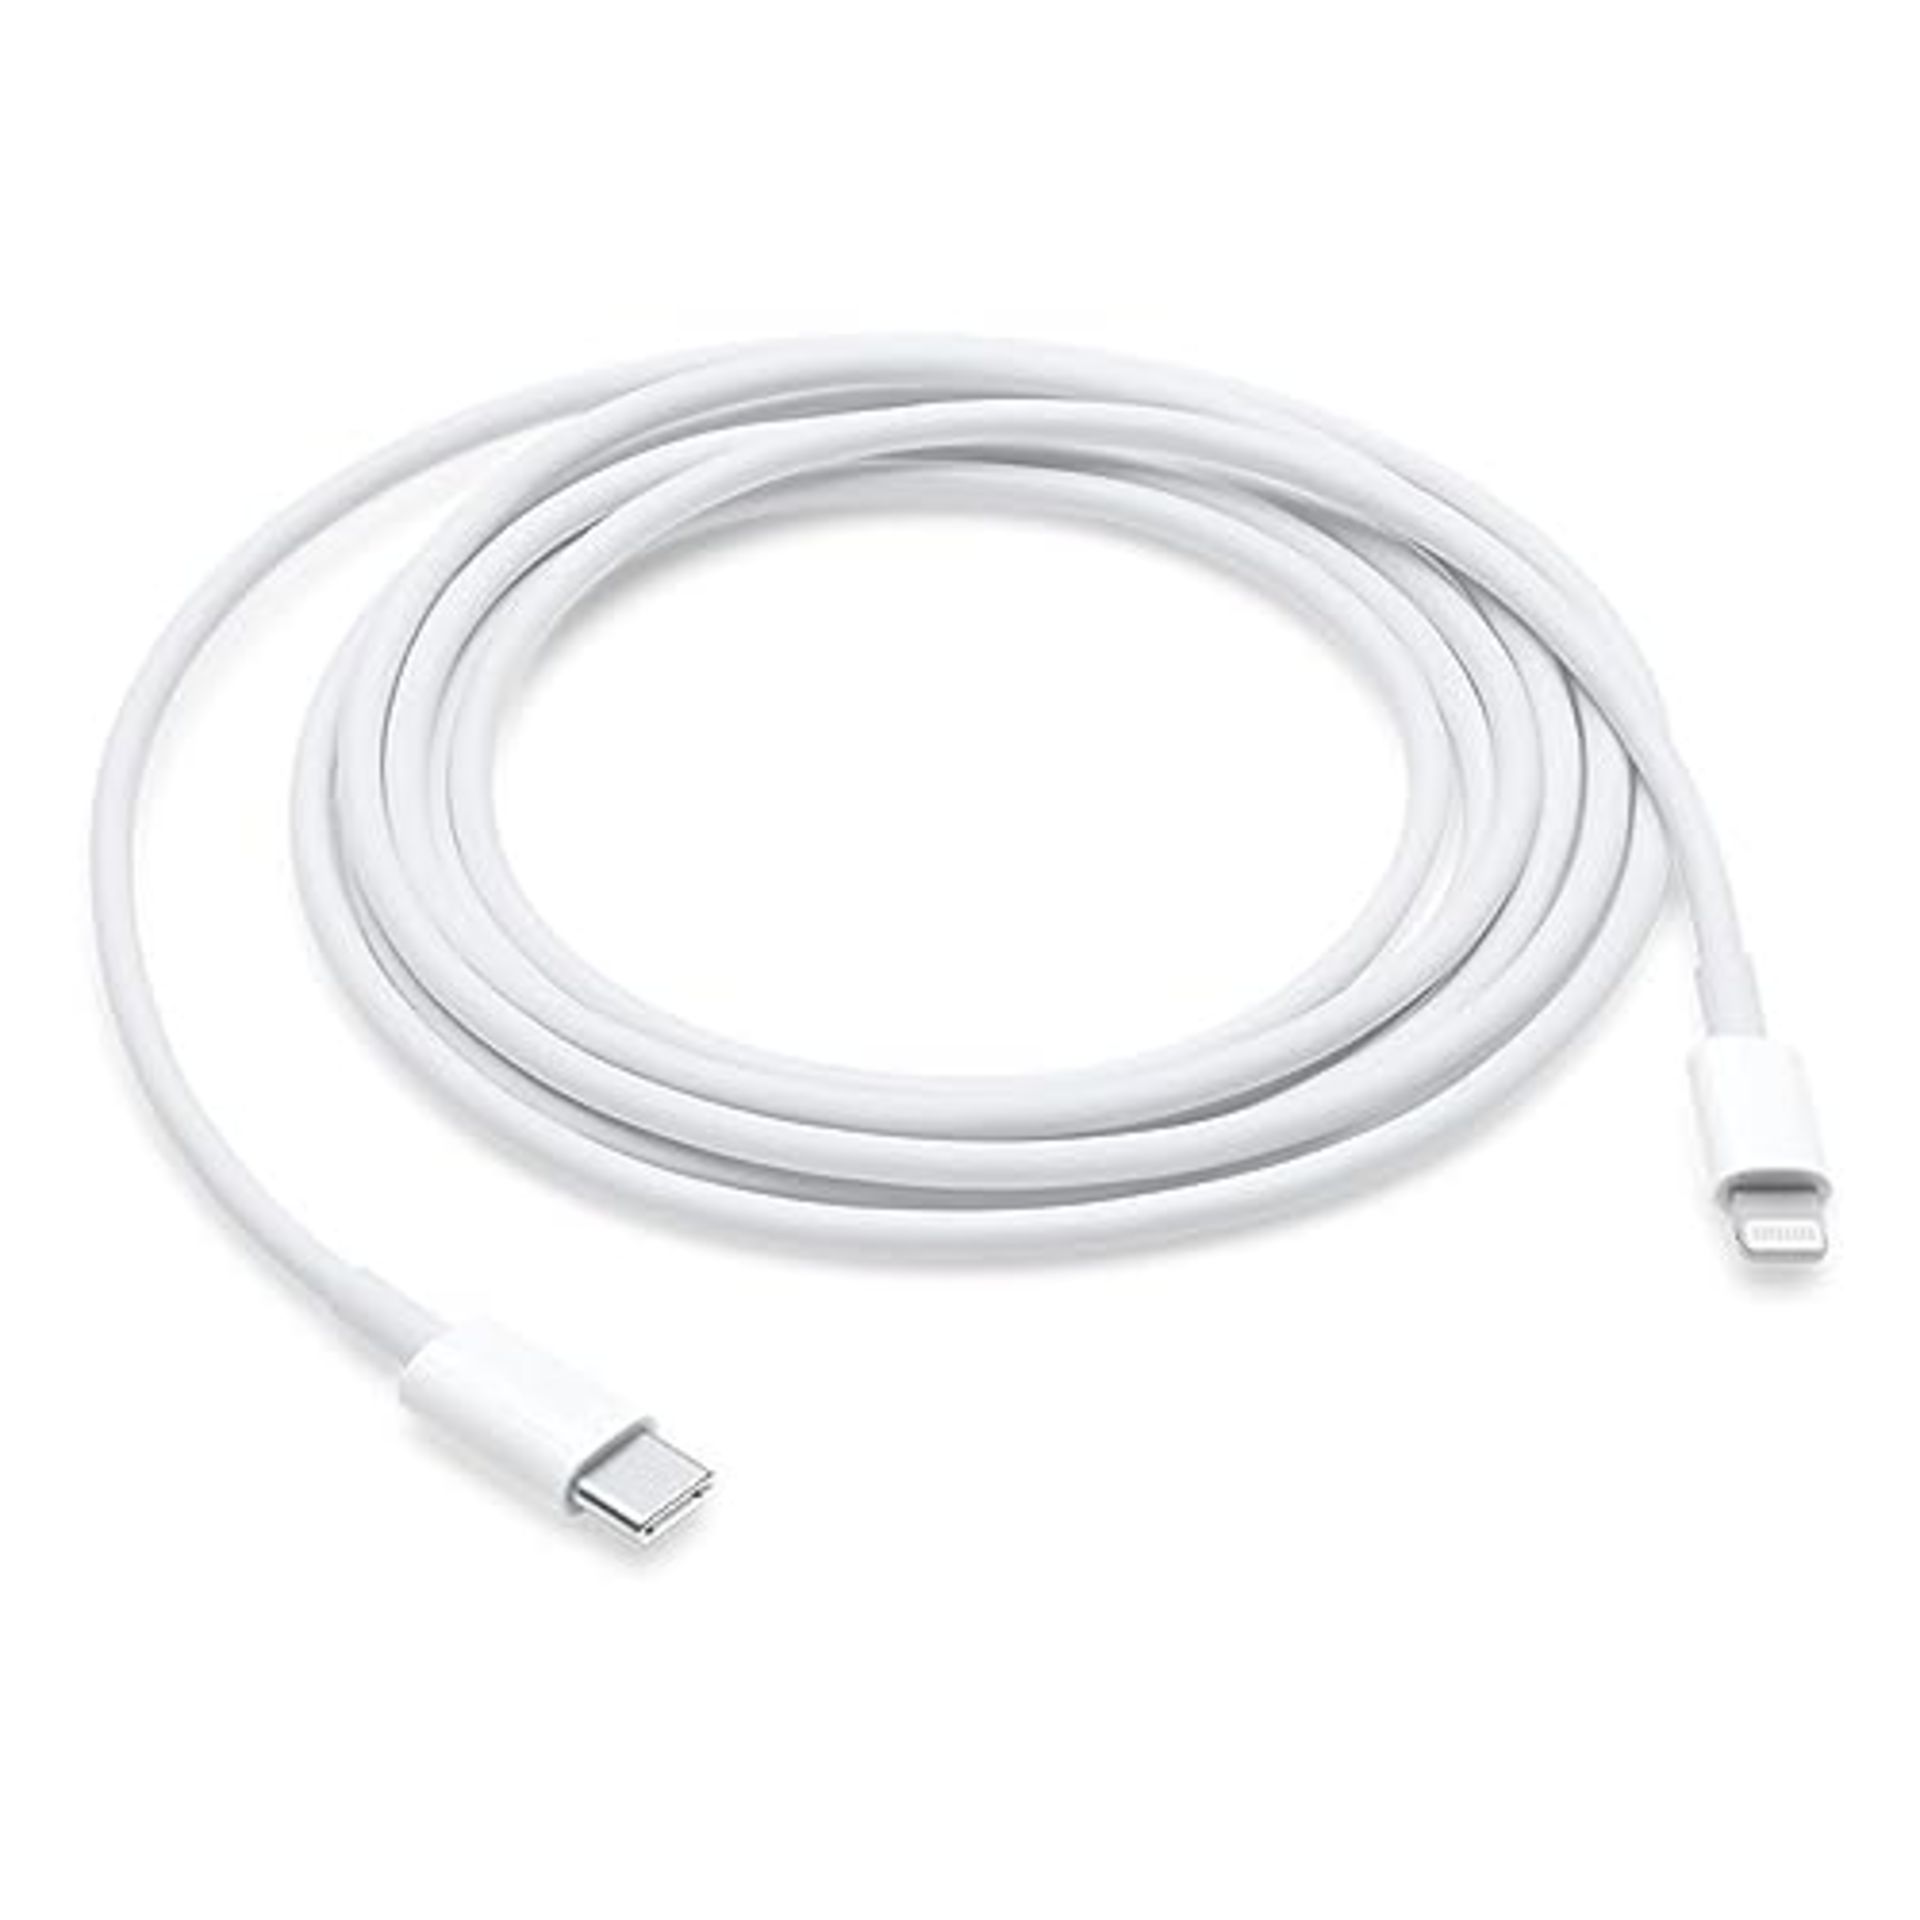 Apple USB-C to Lightning Cable (1m) - Image 3 of 4